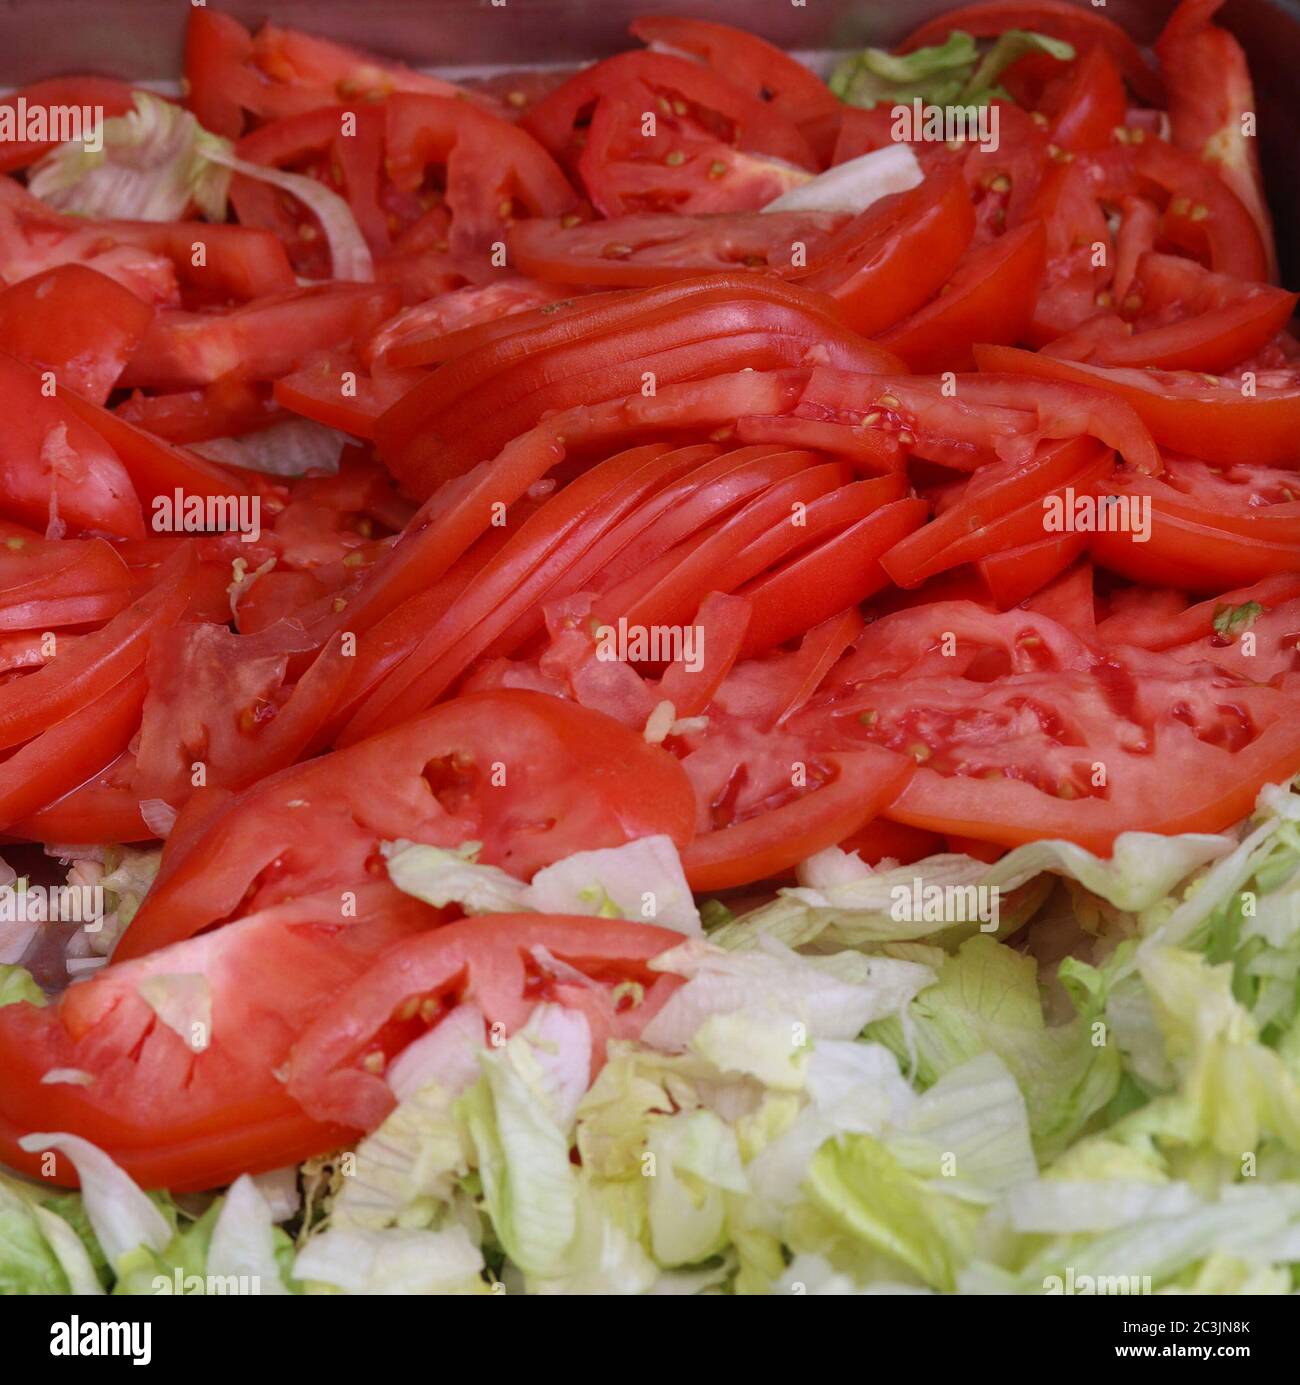 Slices of tomato and lettuce for sandwich, burger and salad fixings Stock  Photo - Alamy